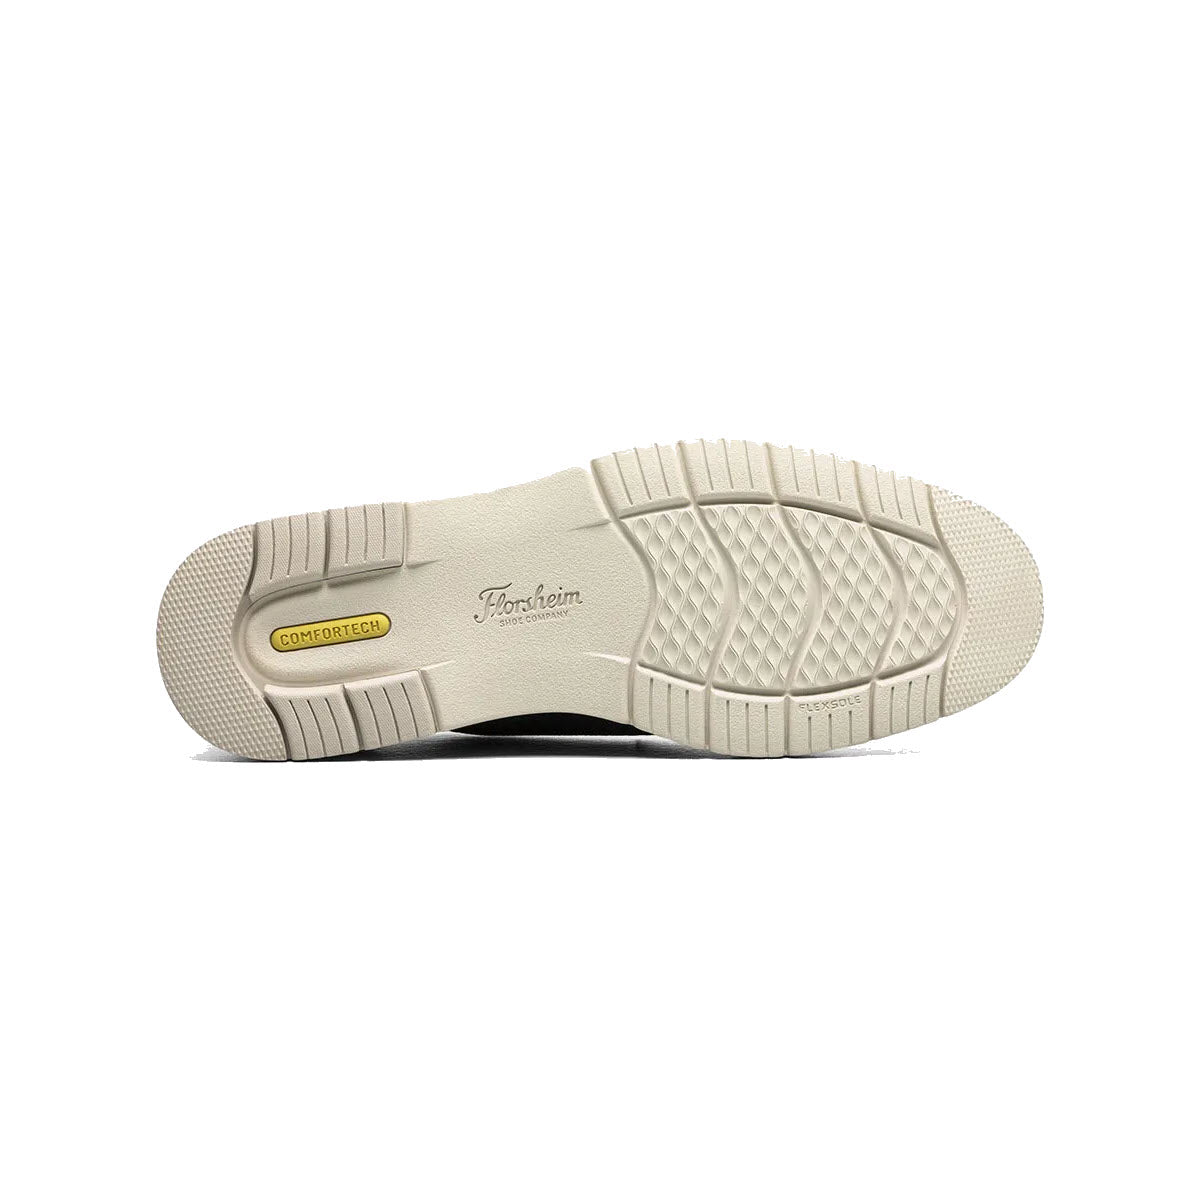 Sole of a light beige Florsheim VIBE KNIT PLAIN TOE OXFORD NAVY dress shoe displaying tread patterns and Comfortech footbed imprints, isolated on a white background.